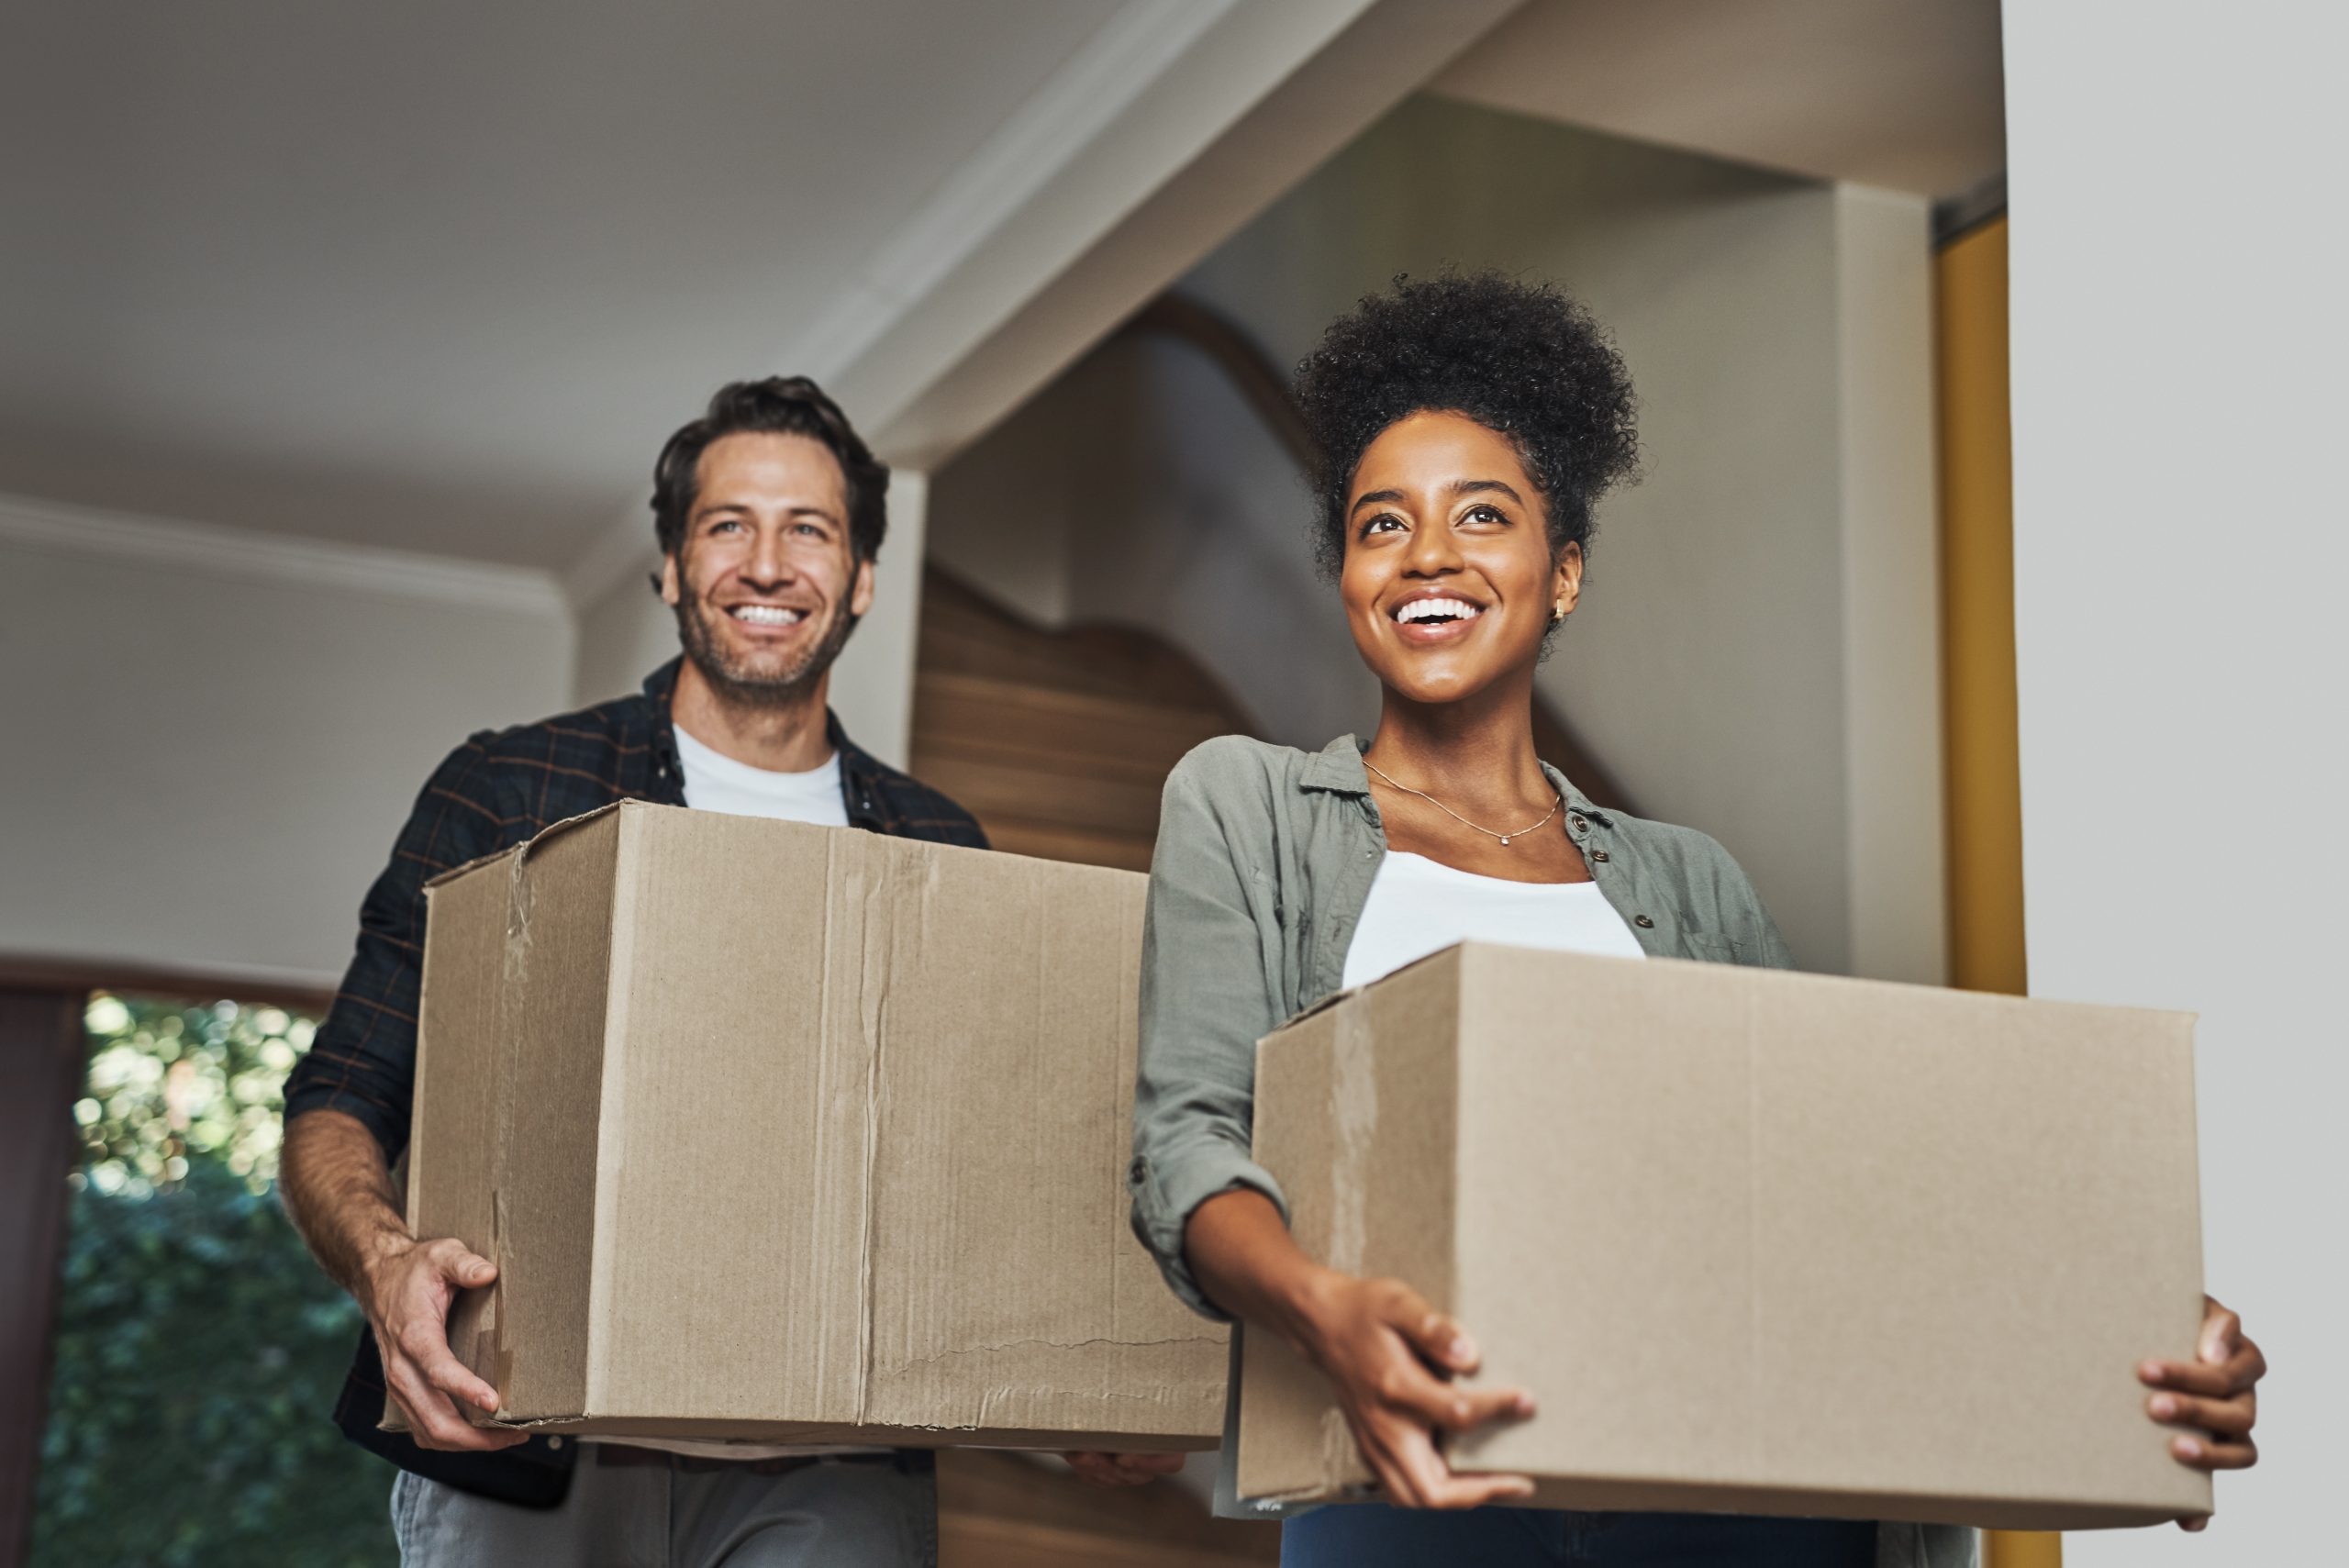 New house, moving and happy couple carrying boxes while feeling proud and excited about buying a house with a mortgage loan. Interracial husband and wife first time buyers unpacking in dream home.